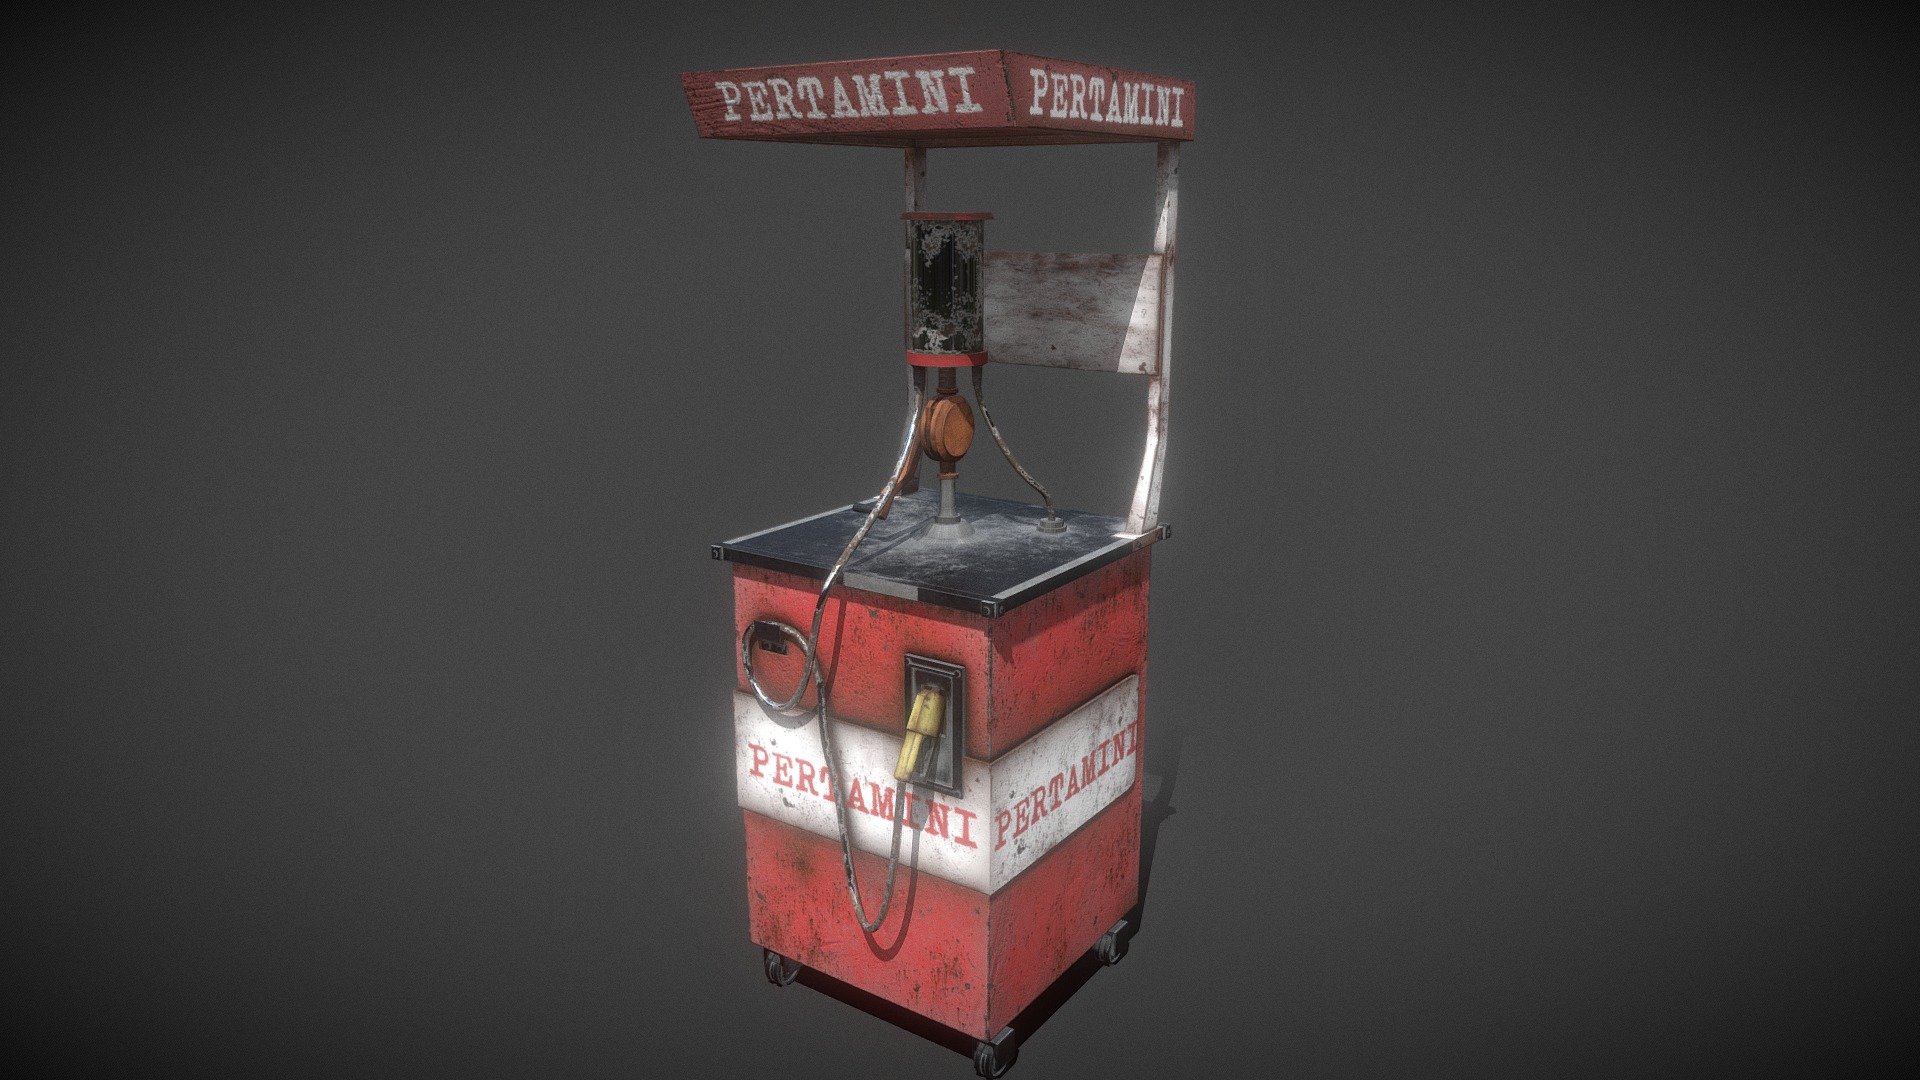 # Pertamini Gas Station Mini in Indonesian

Mini refueling stations or mini refueling stations (short for Mini Gas Pumps) are retail fuel oil (BBM) sales businesses that no longer use jerry cans or bottles, but instead use a manual pump with measuring cups or even a dispenser like gas stations.

Create In = Blender &amp; Substance Painter

Support Me By Donation :
https://paypal.me/putrabxmp?country.x=ID&amp;locale.x=id_ID - Pertamini Game Asset - 3D model by solodevelopment97 3d model